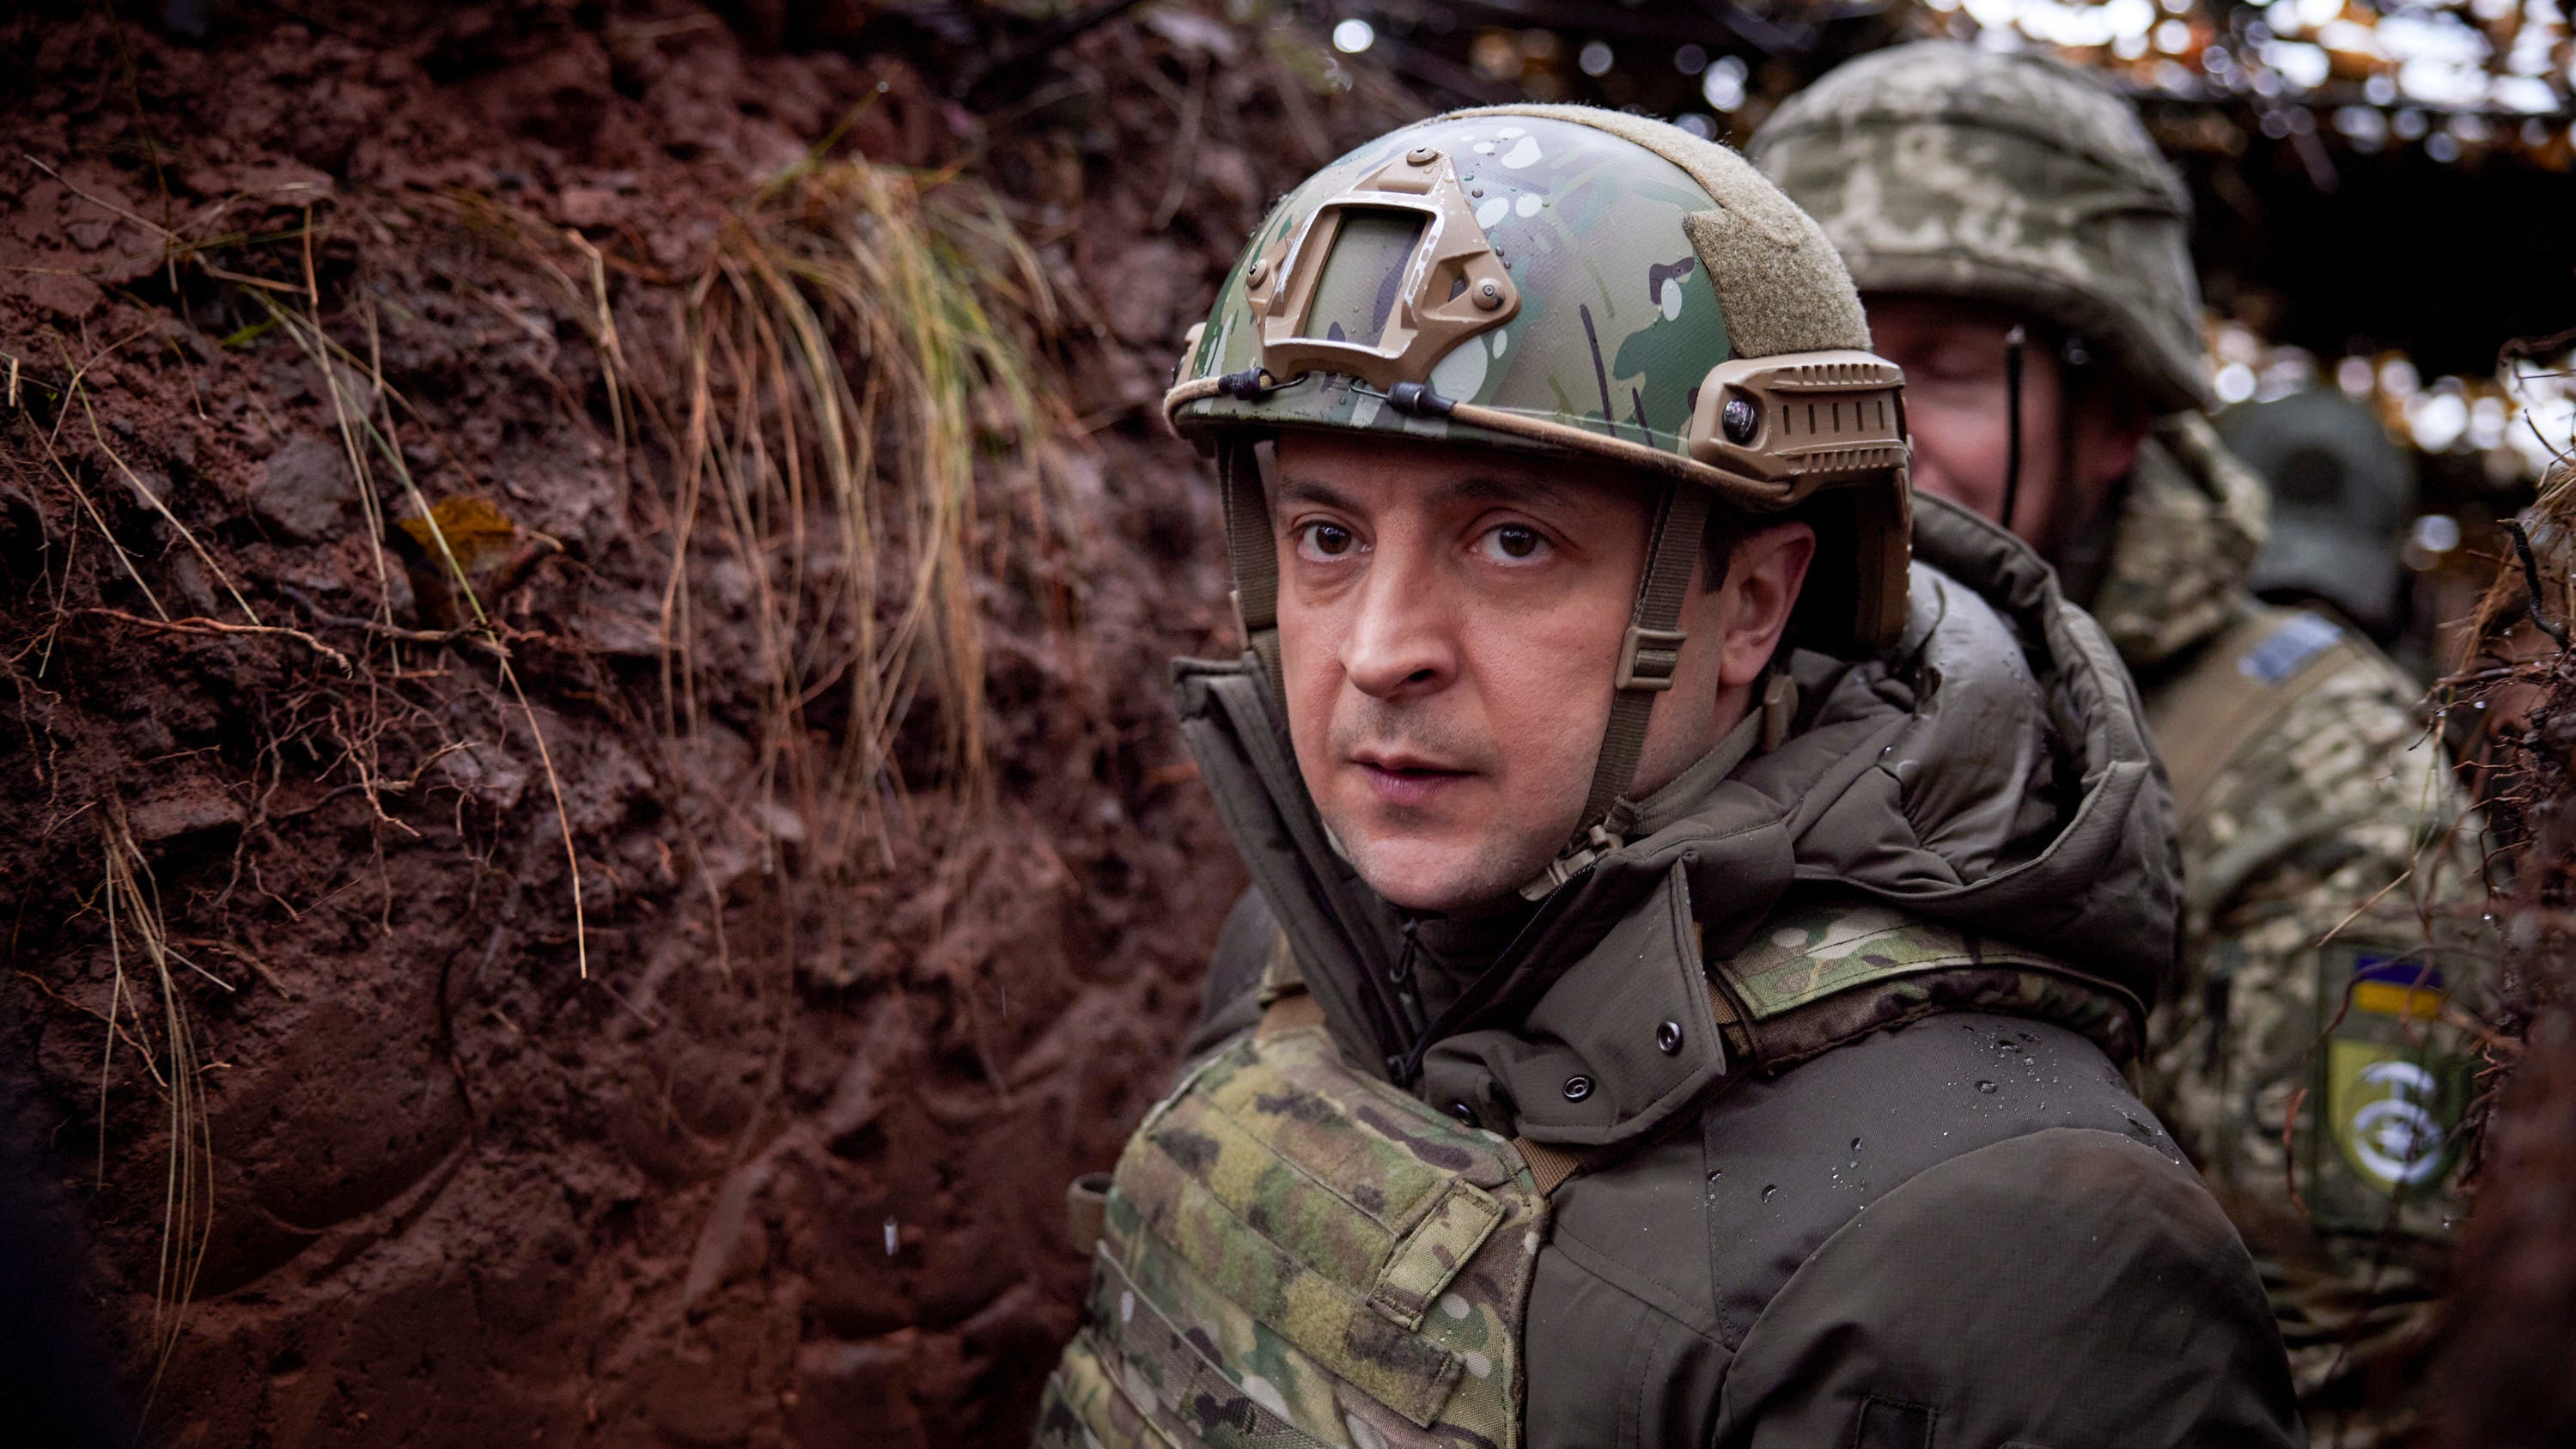 Fact check: Volodymyr Zelenskyy pictured in uniform in Donbas in 2021